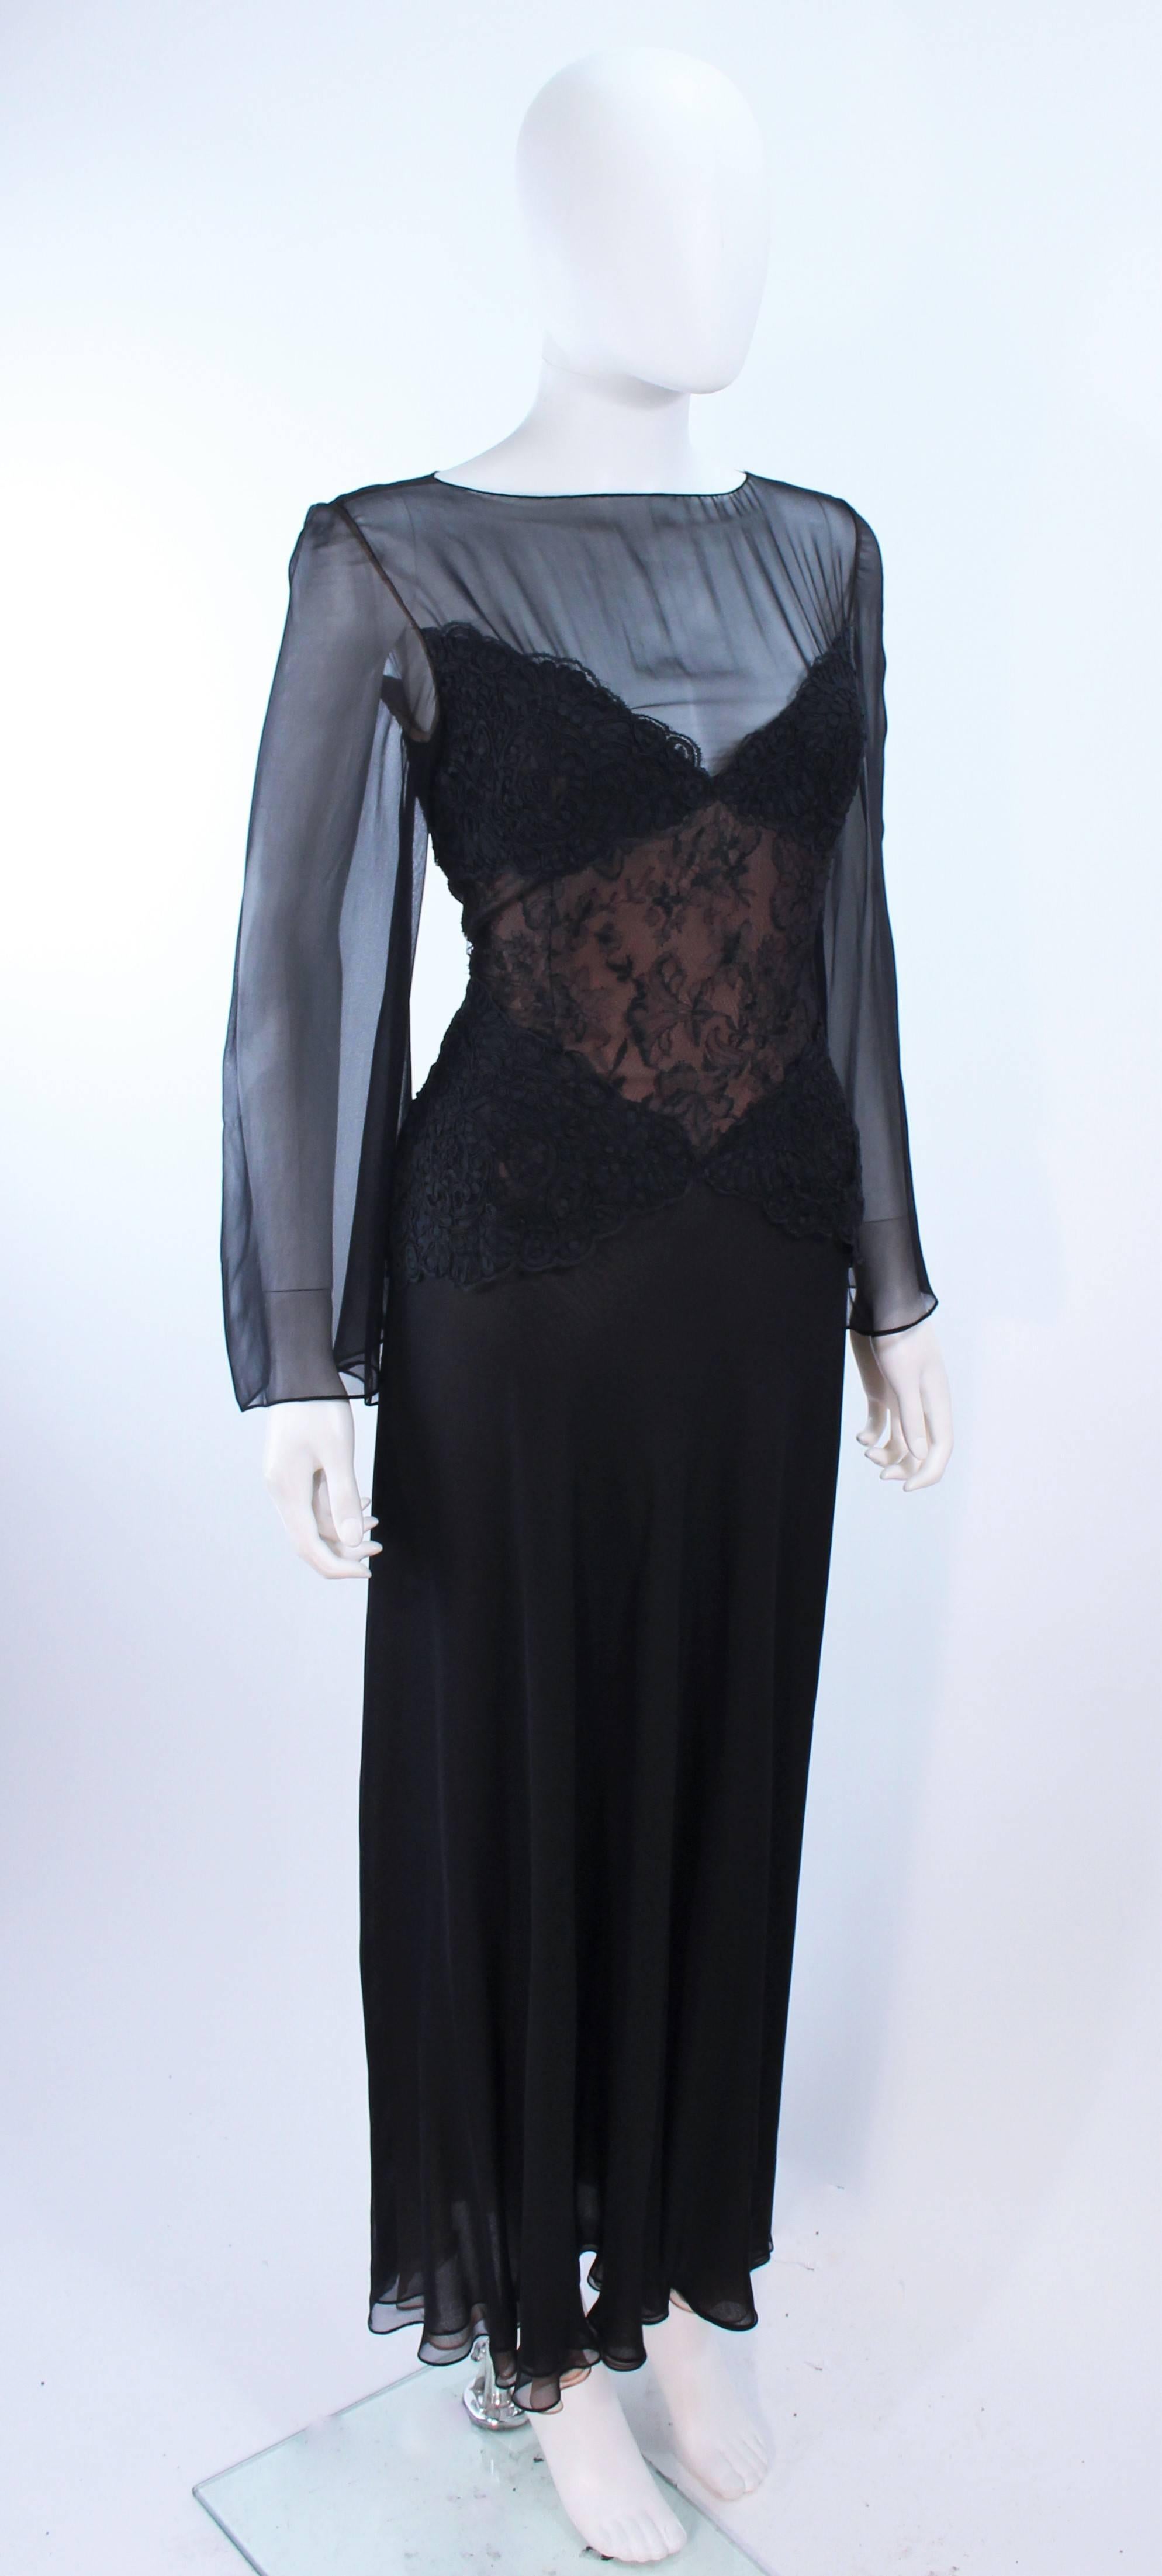 BILL BLASS Black Lace Chiffon Gown with Nude Underlay Size 10 12 For Sale 1